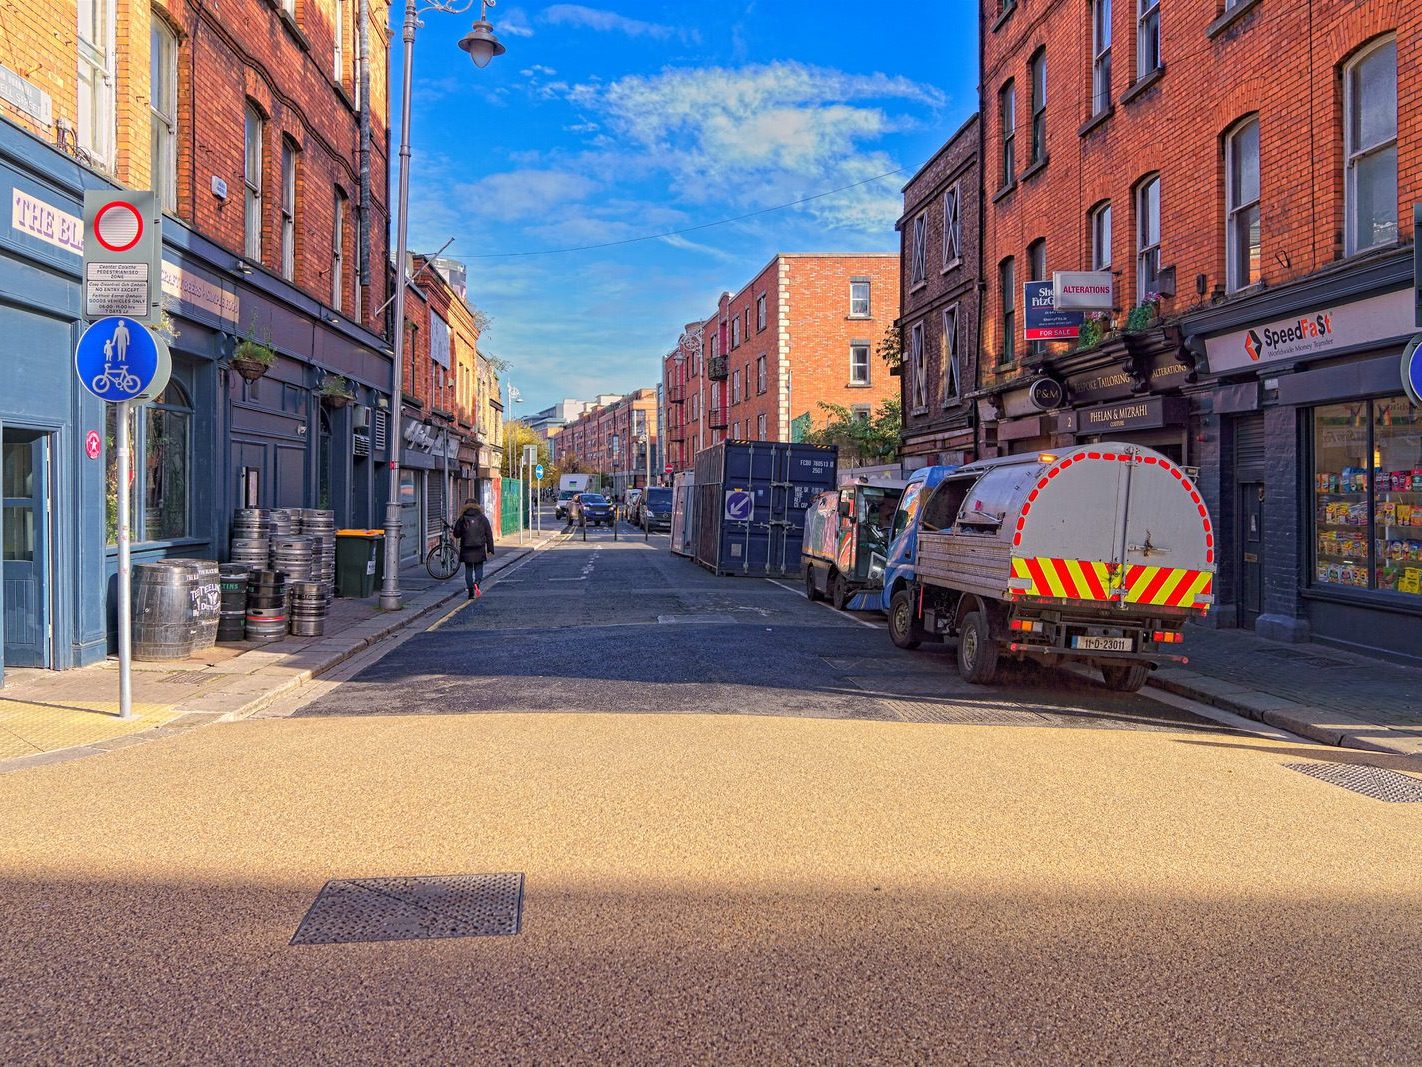 CAPEL STREET IS STILL A W.I.P. [THE PERIOD BETWEEN HALLOWEEN AND CHRISTMAS]-224788-1